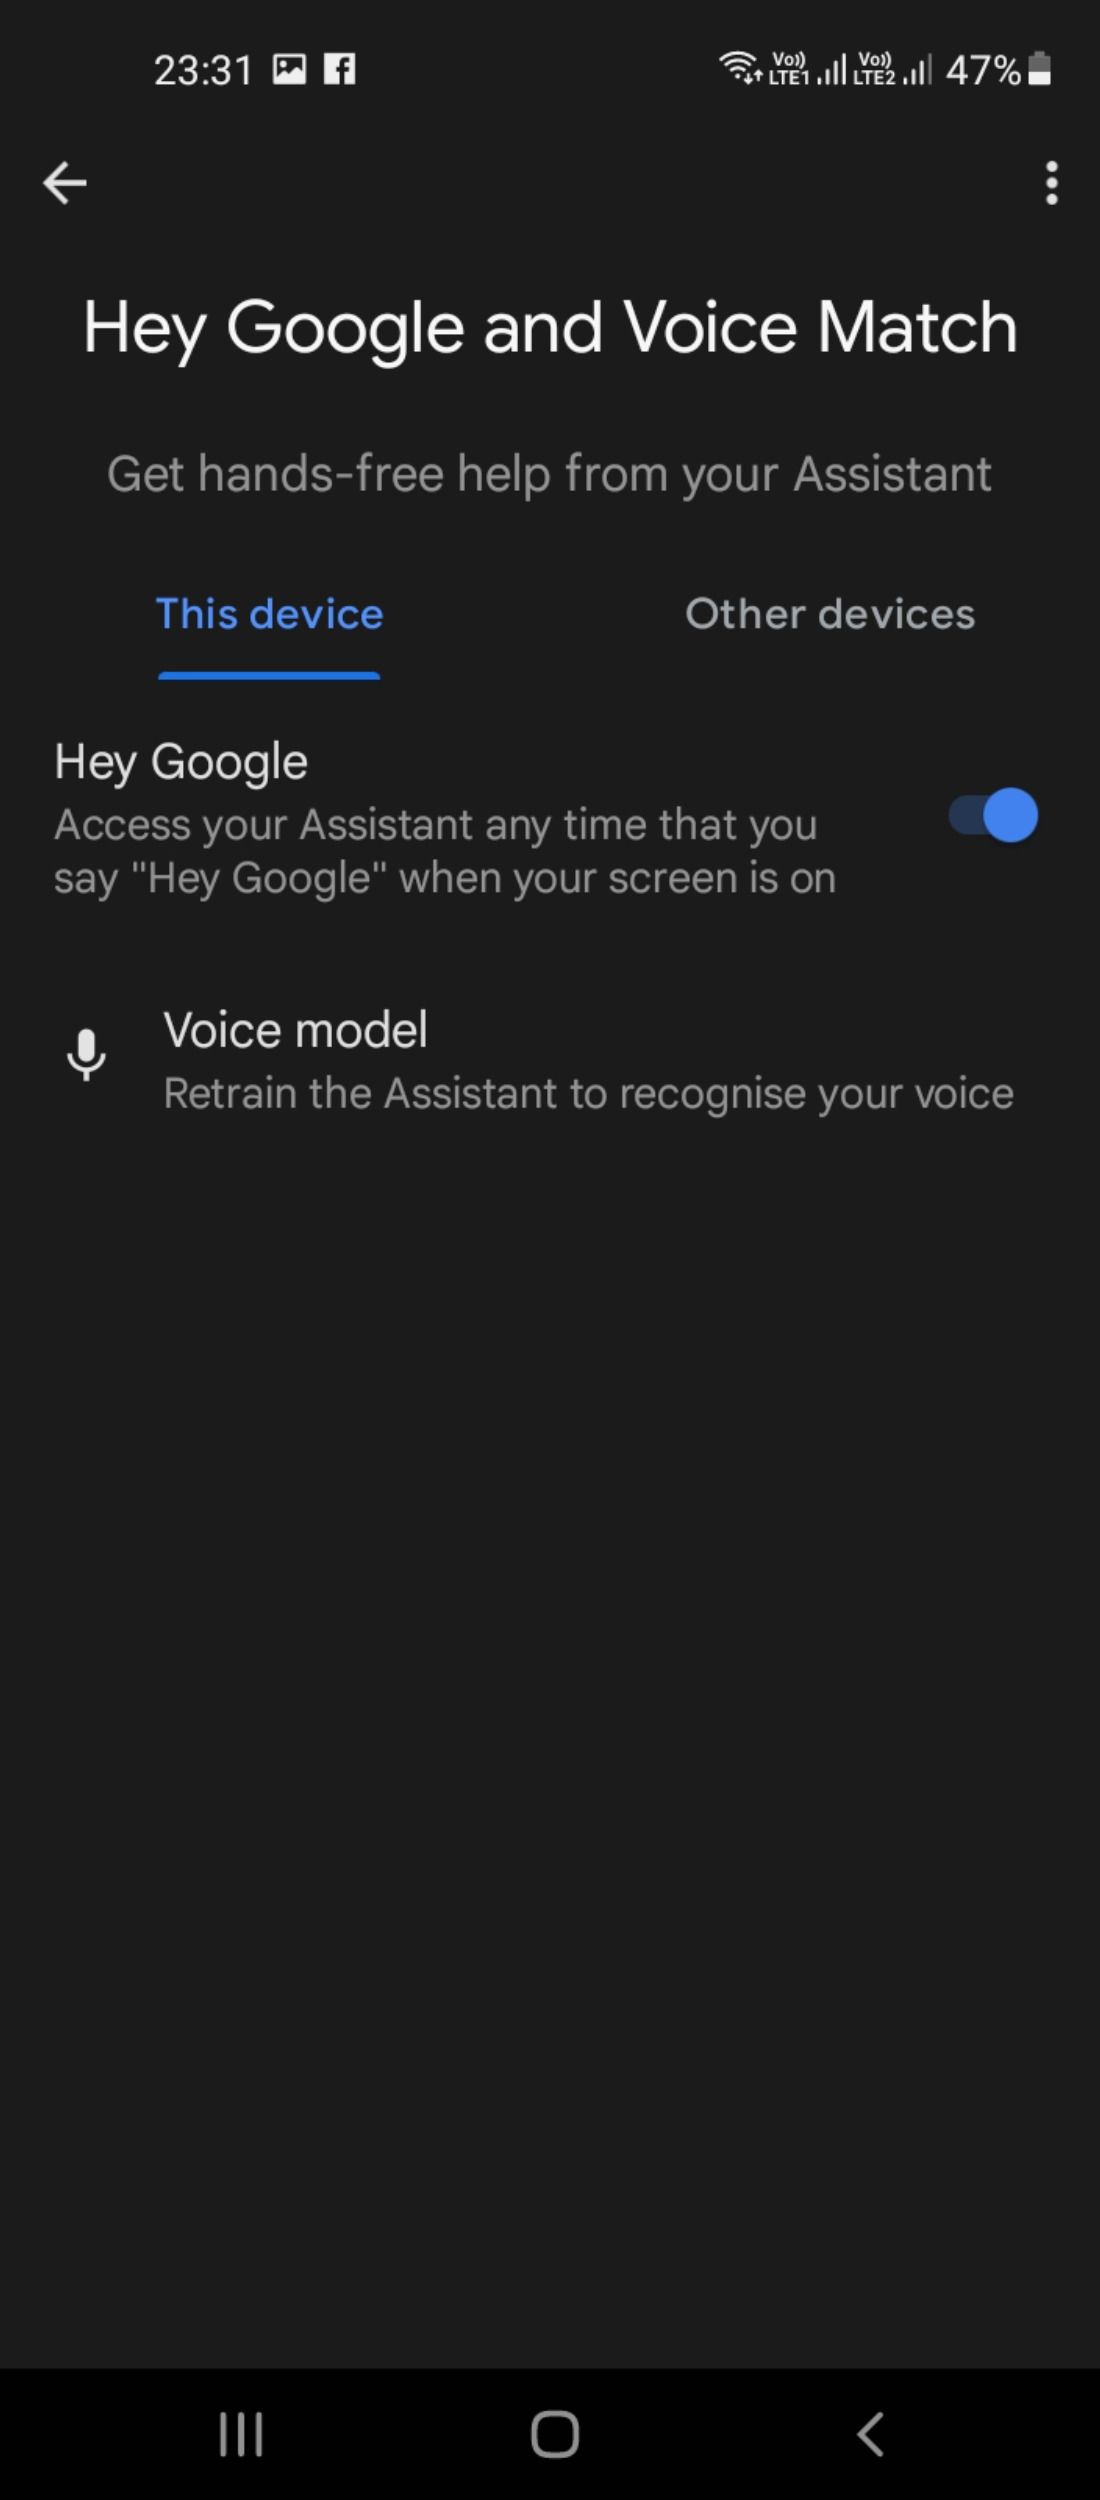 Voice match settings in Google